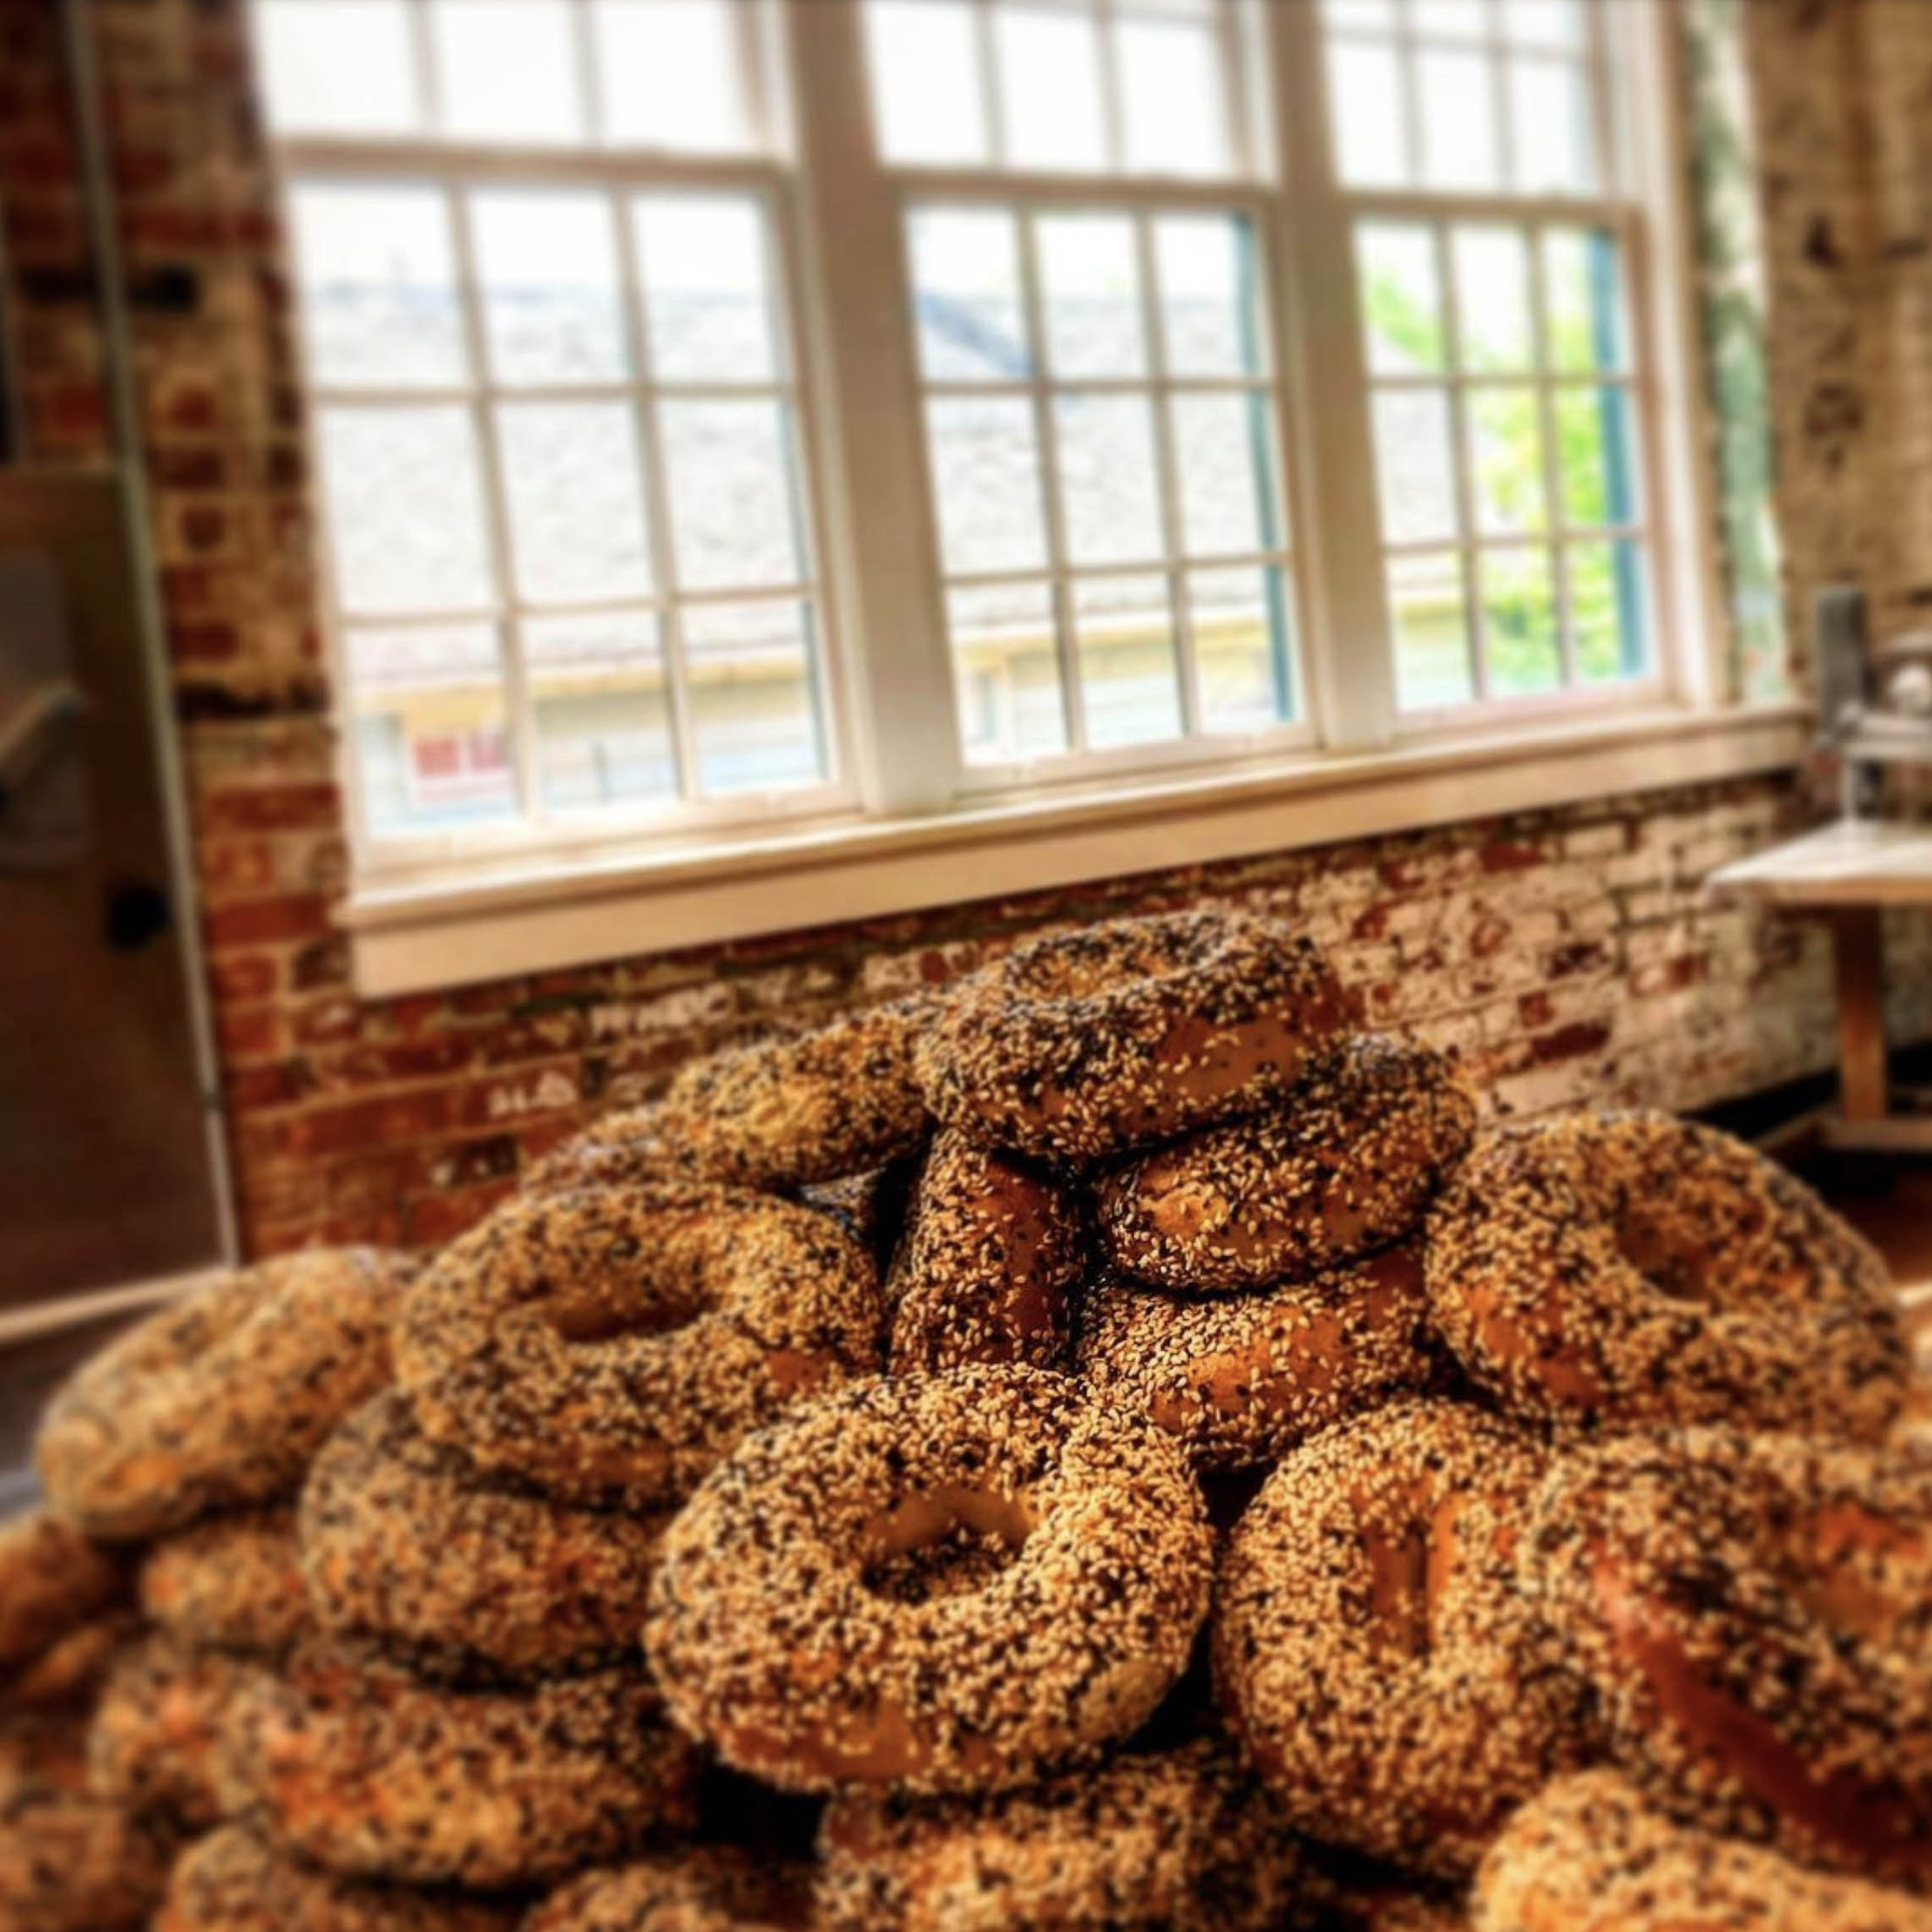 A pile of bagels from Logan's Bagels in Buffalo, NY